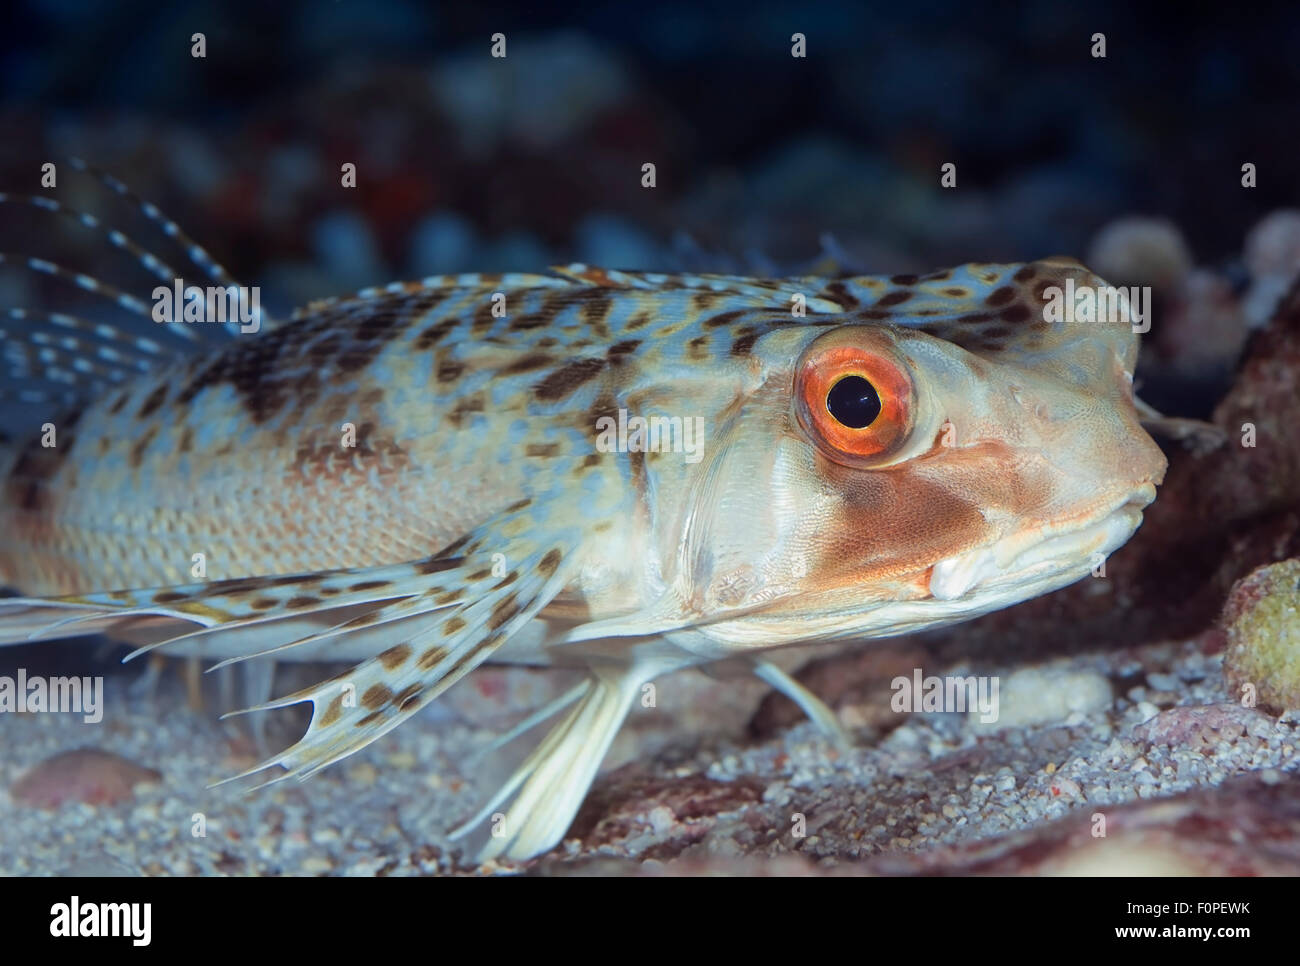 CLOSE-UP VIEW OF HELMET GURNARD HEAD WAITING ON CORAL REEF BOTTOM Stock Photo